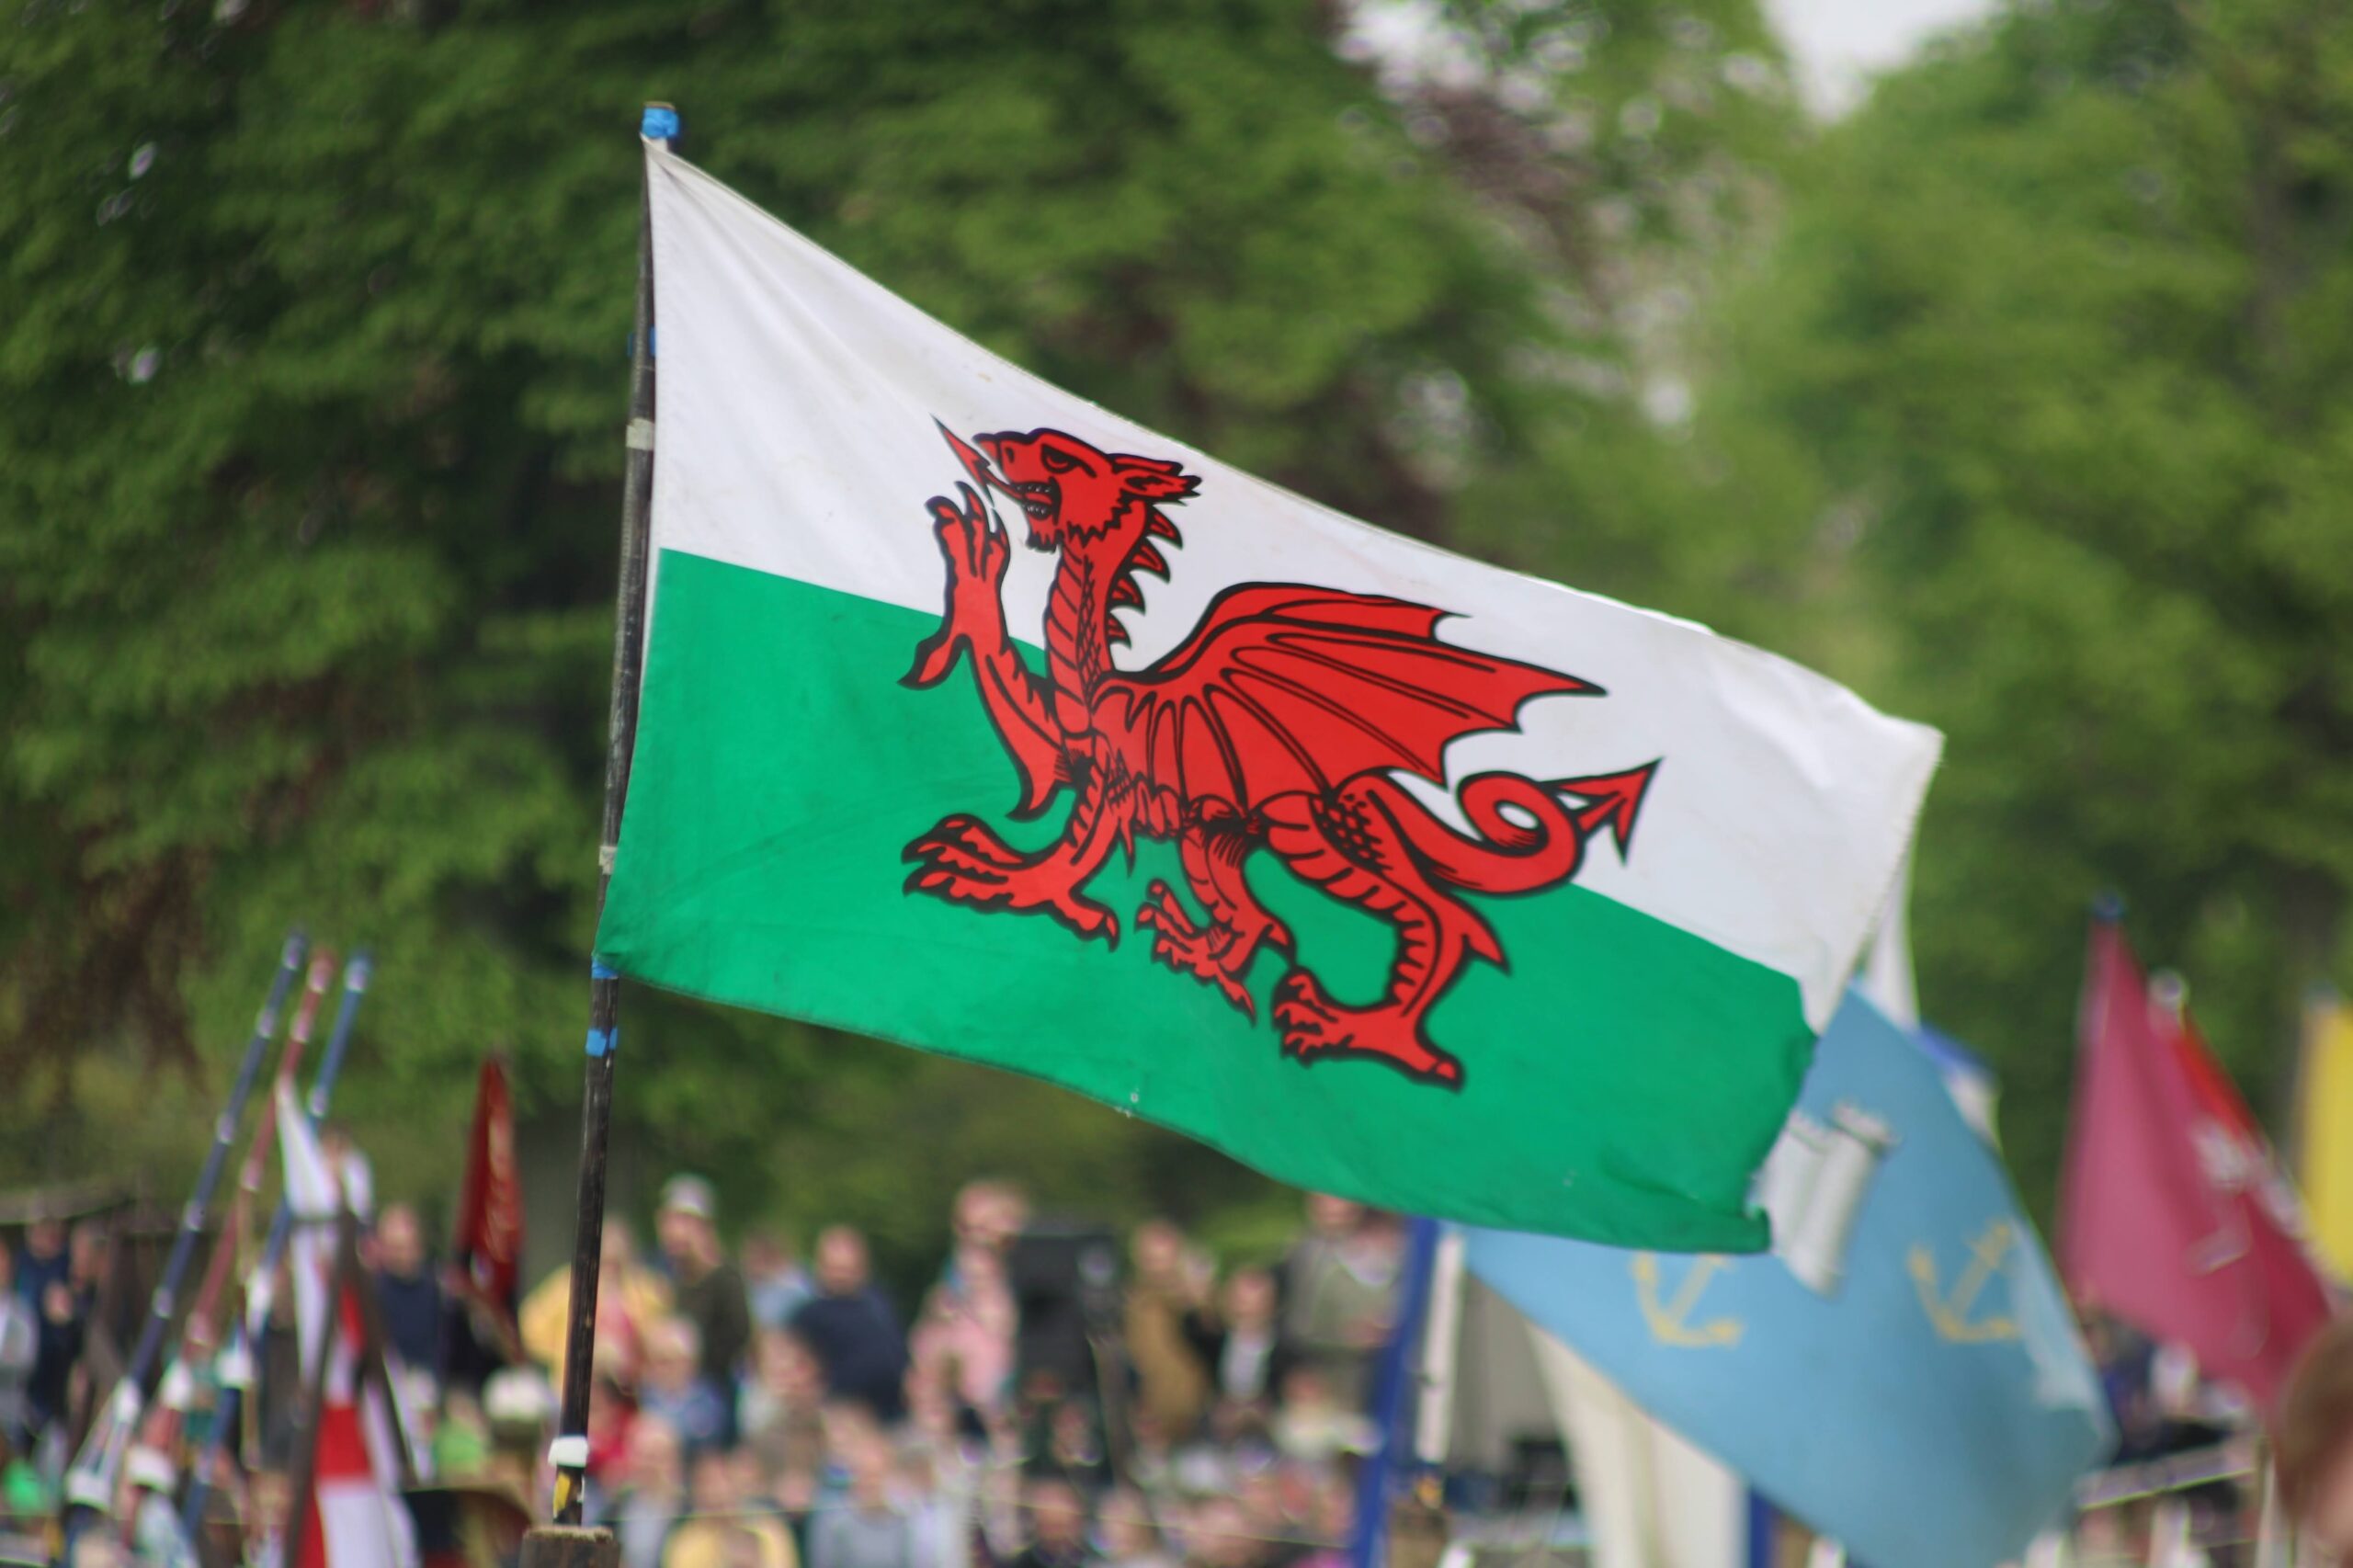 Welsh Independence: The Rise of a New Republic?